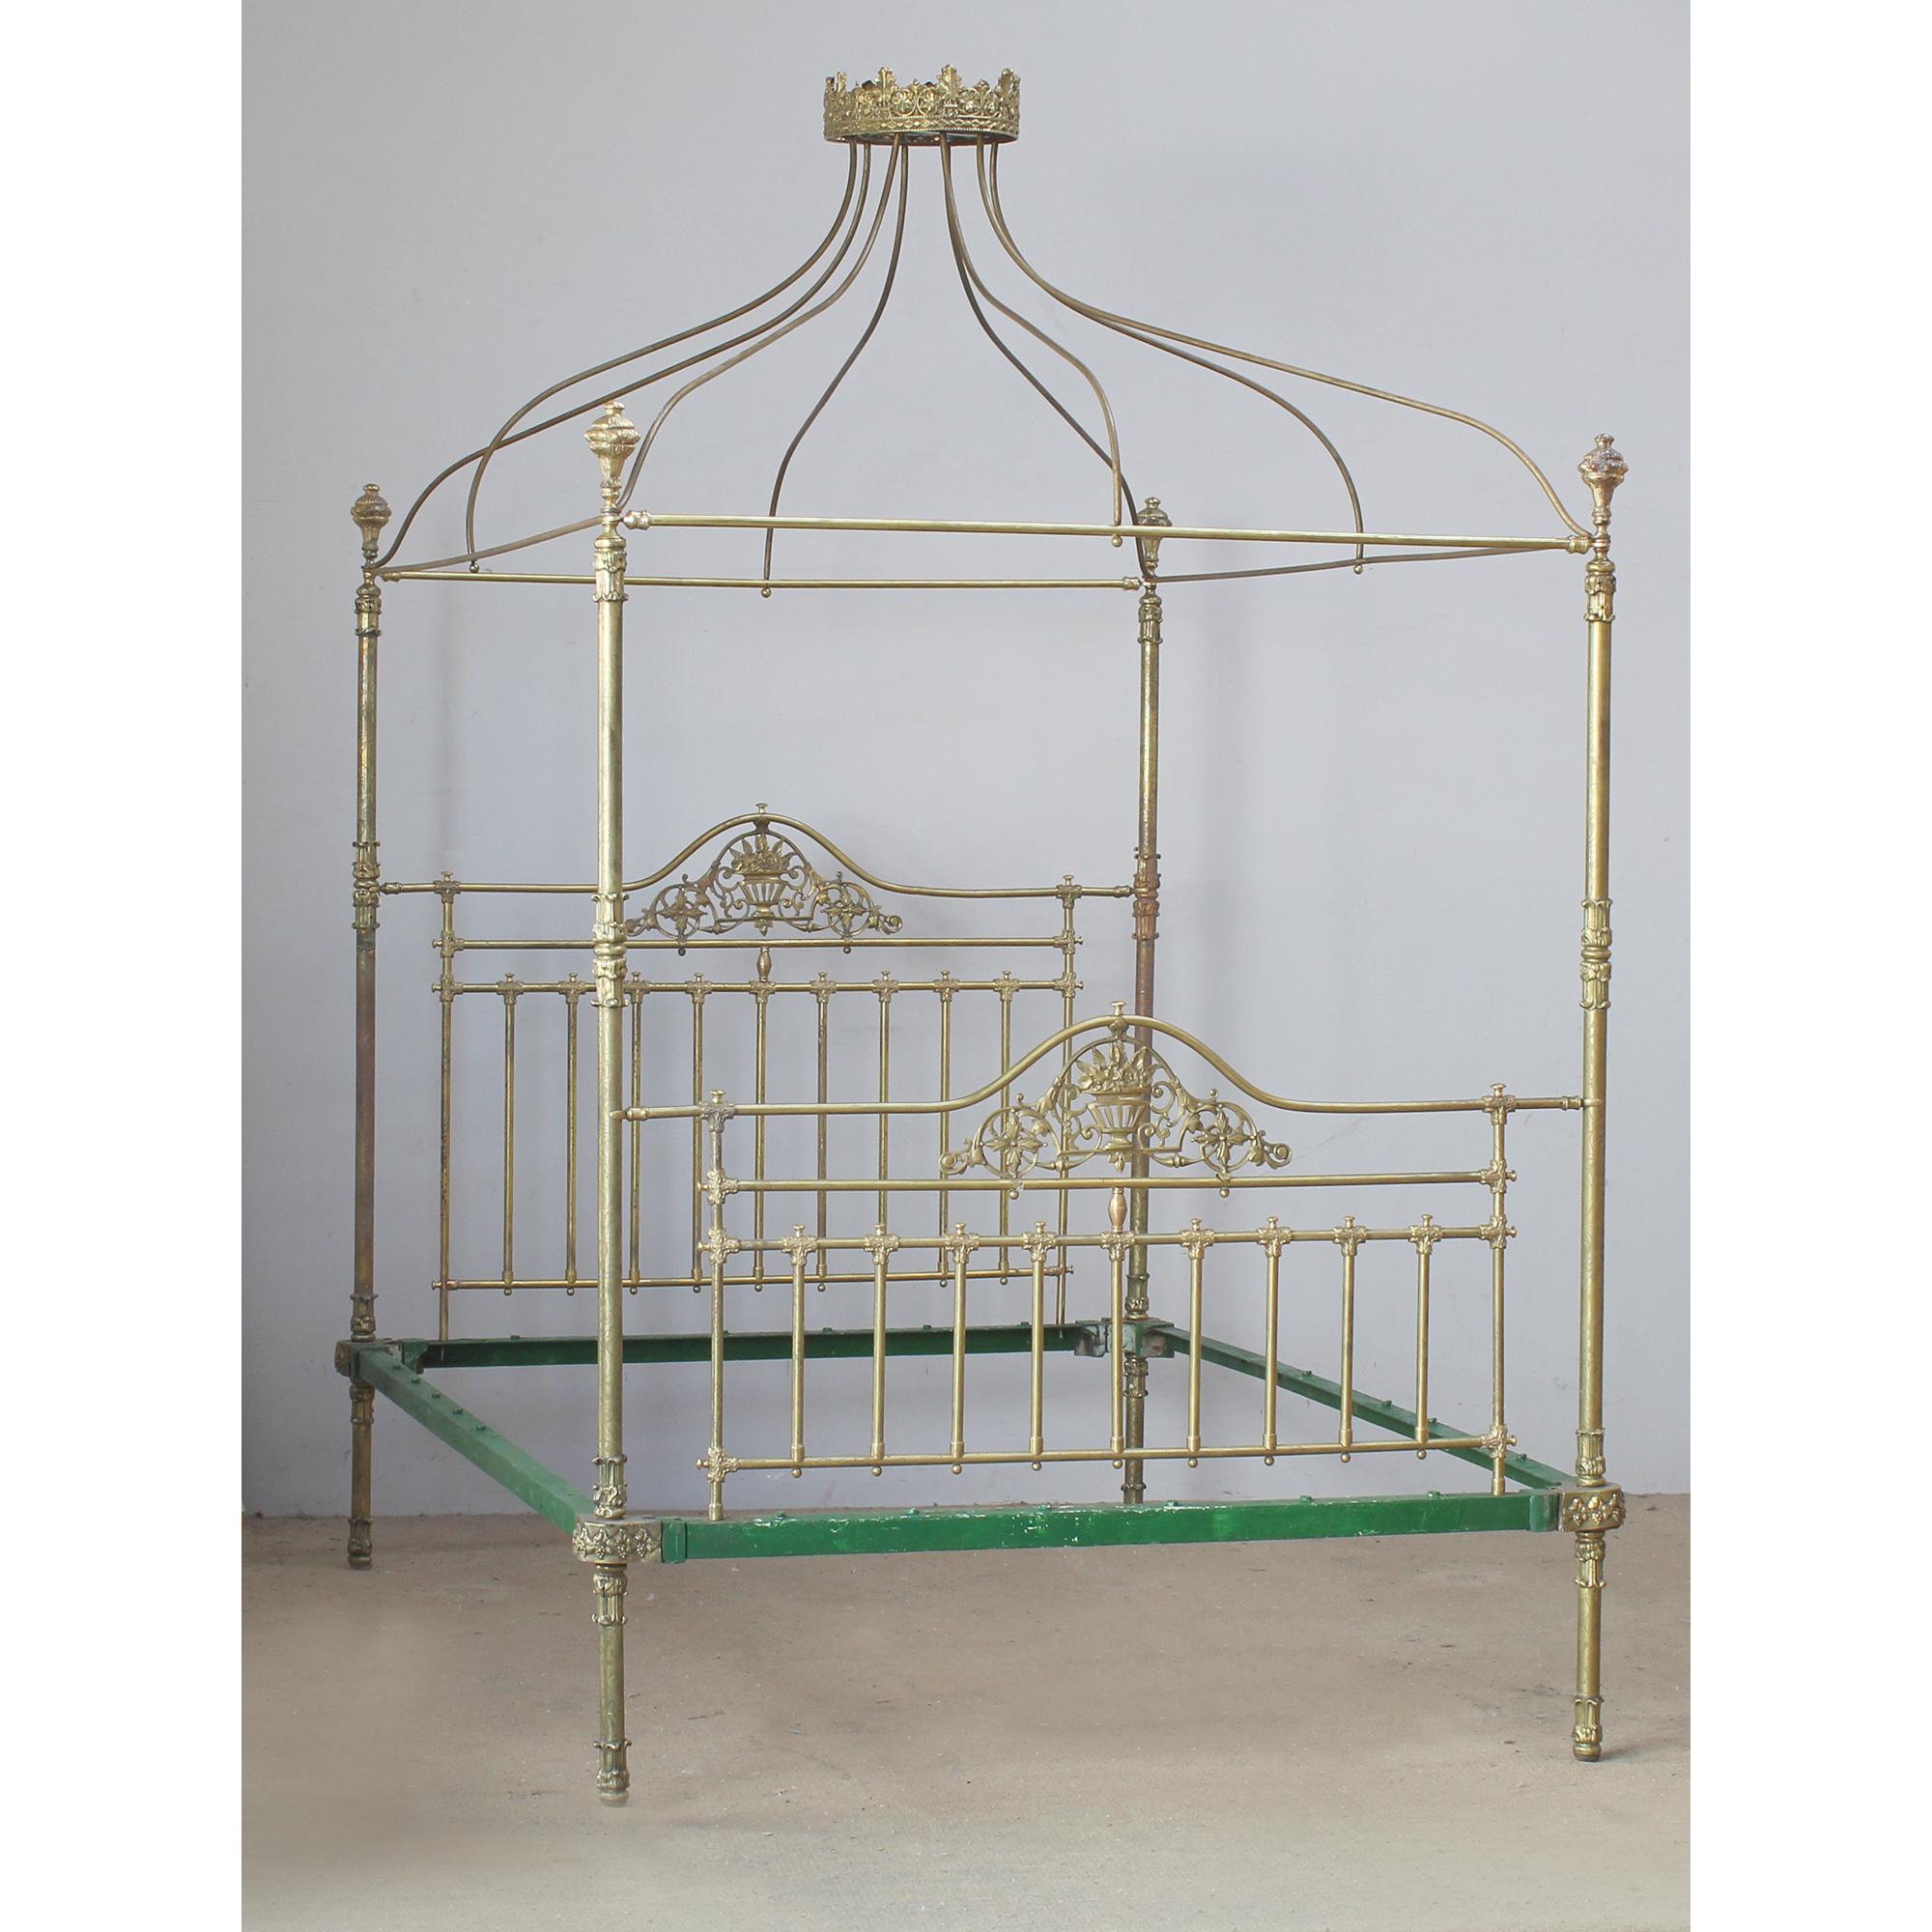 A magnificent all brass four poster bed with crown and canopy, Circa 1870.
This superb example of a late Victorian brass bed has fine etched posts with delicate castings, ornately cast brass kneecaps, brass feet and decorative brass knobs.
The two